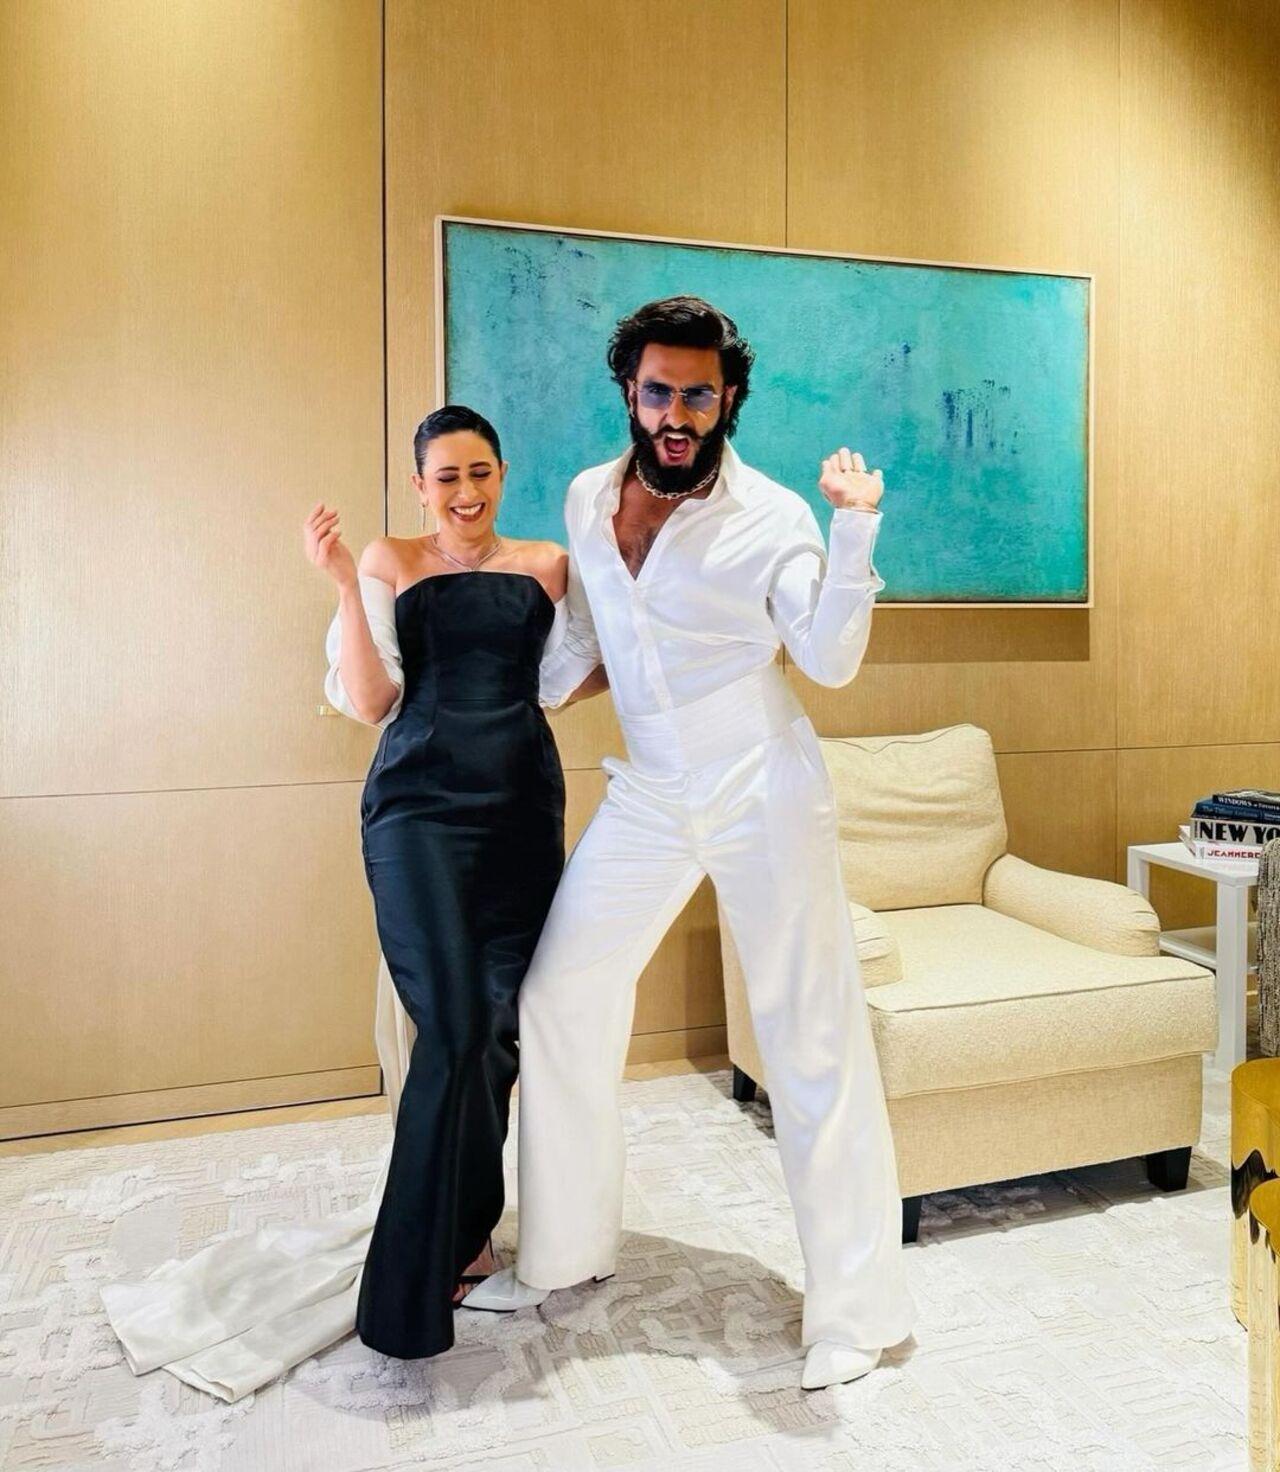 Karisma Kapoor took to her Instagram handle to share some goofy pictures with Ranveer Singh from the event